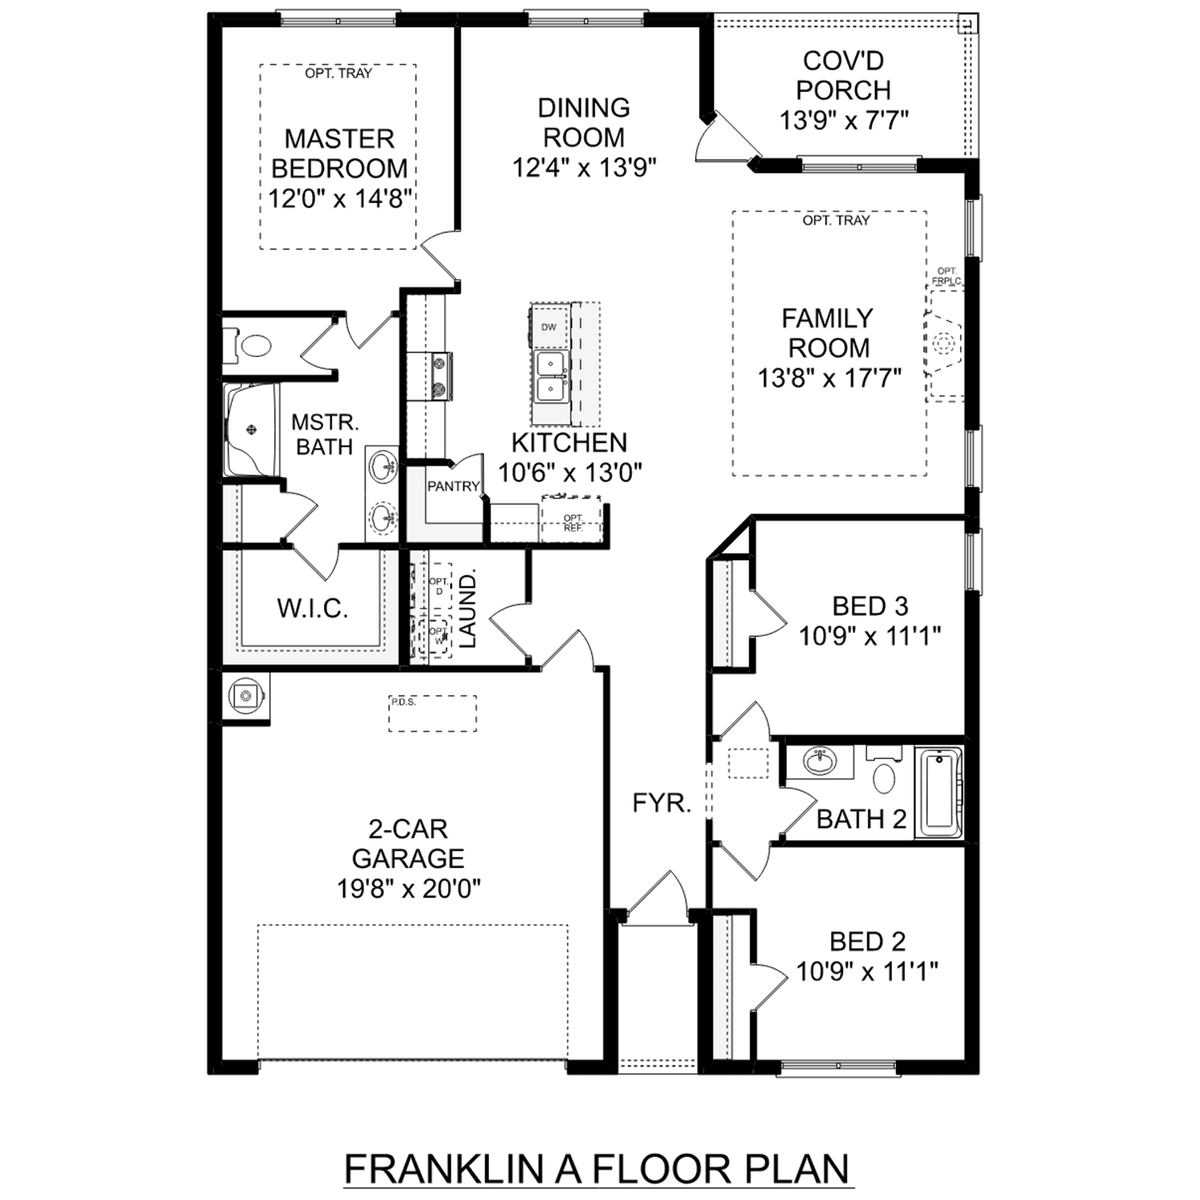 1 - The Franklin floor plan layout for 204 Pine Island in Davidson Homes' Wood Trail community.